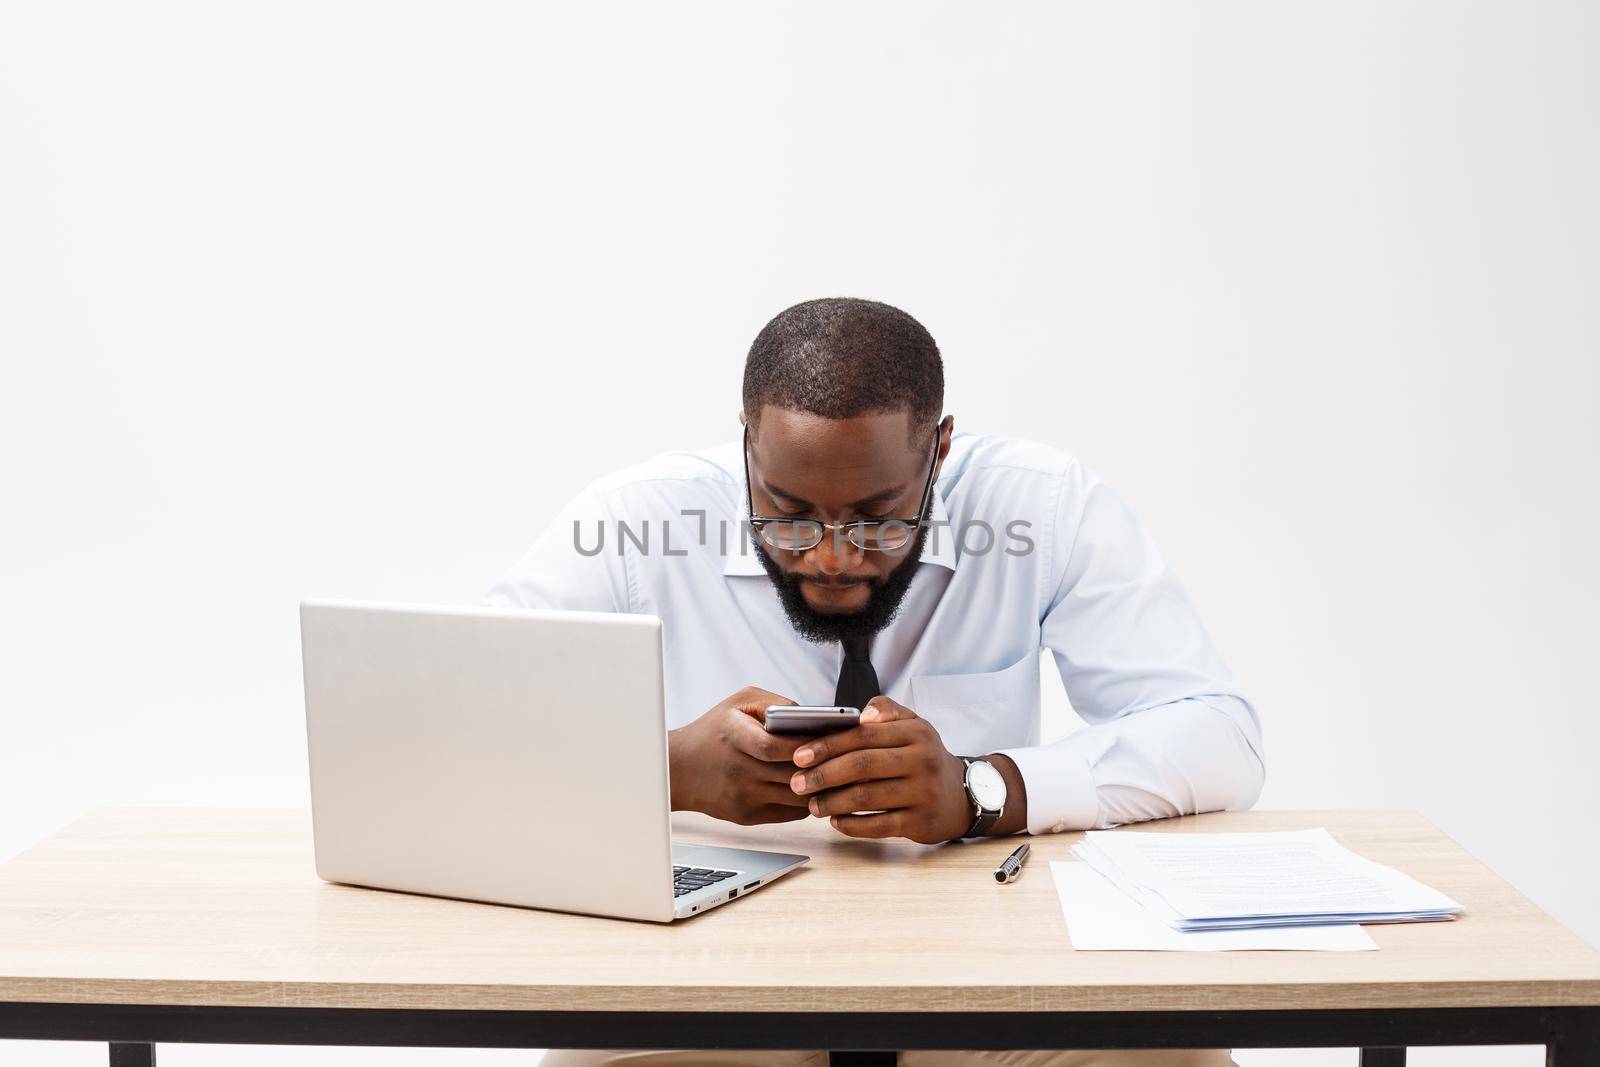 Business is his life. Cheerful young African man in formal wear and working on laptop.